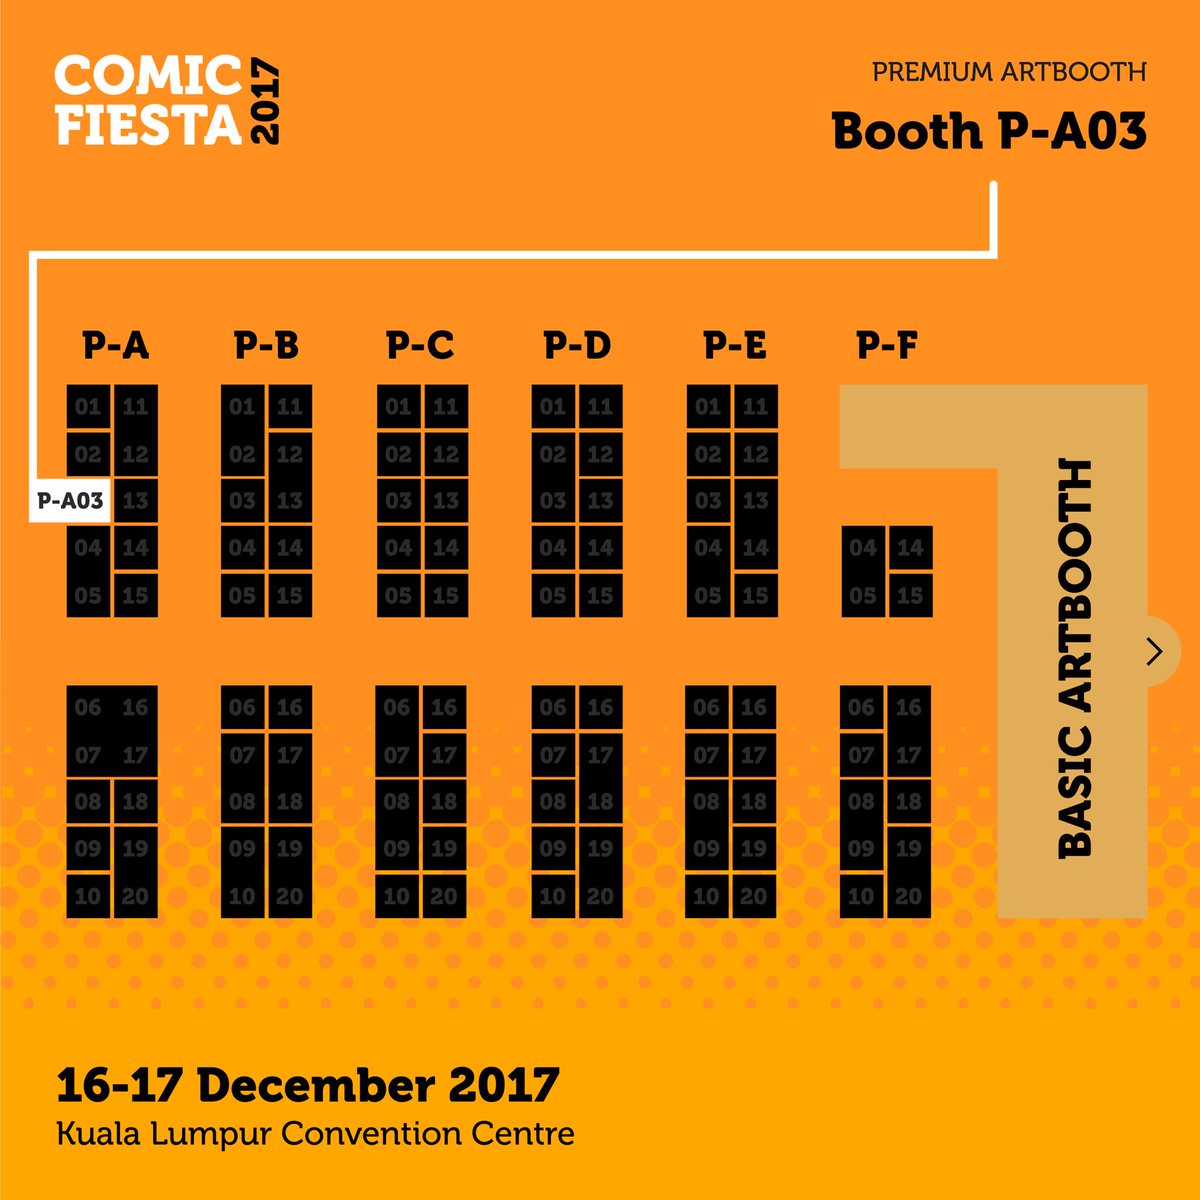 Hello everyone! I'll be setting up a booth over at the Comic Fiesta 2017 premium booth section @ P-A03, and I'm really looking forward to seeing all of you there! Thank you so much again for all your support!
#comicfiesta2017 #merchandise #anime #artbooth